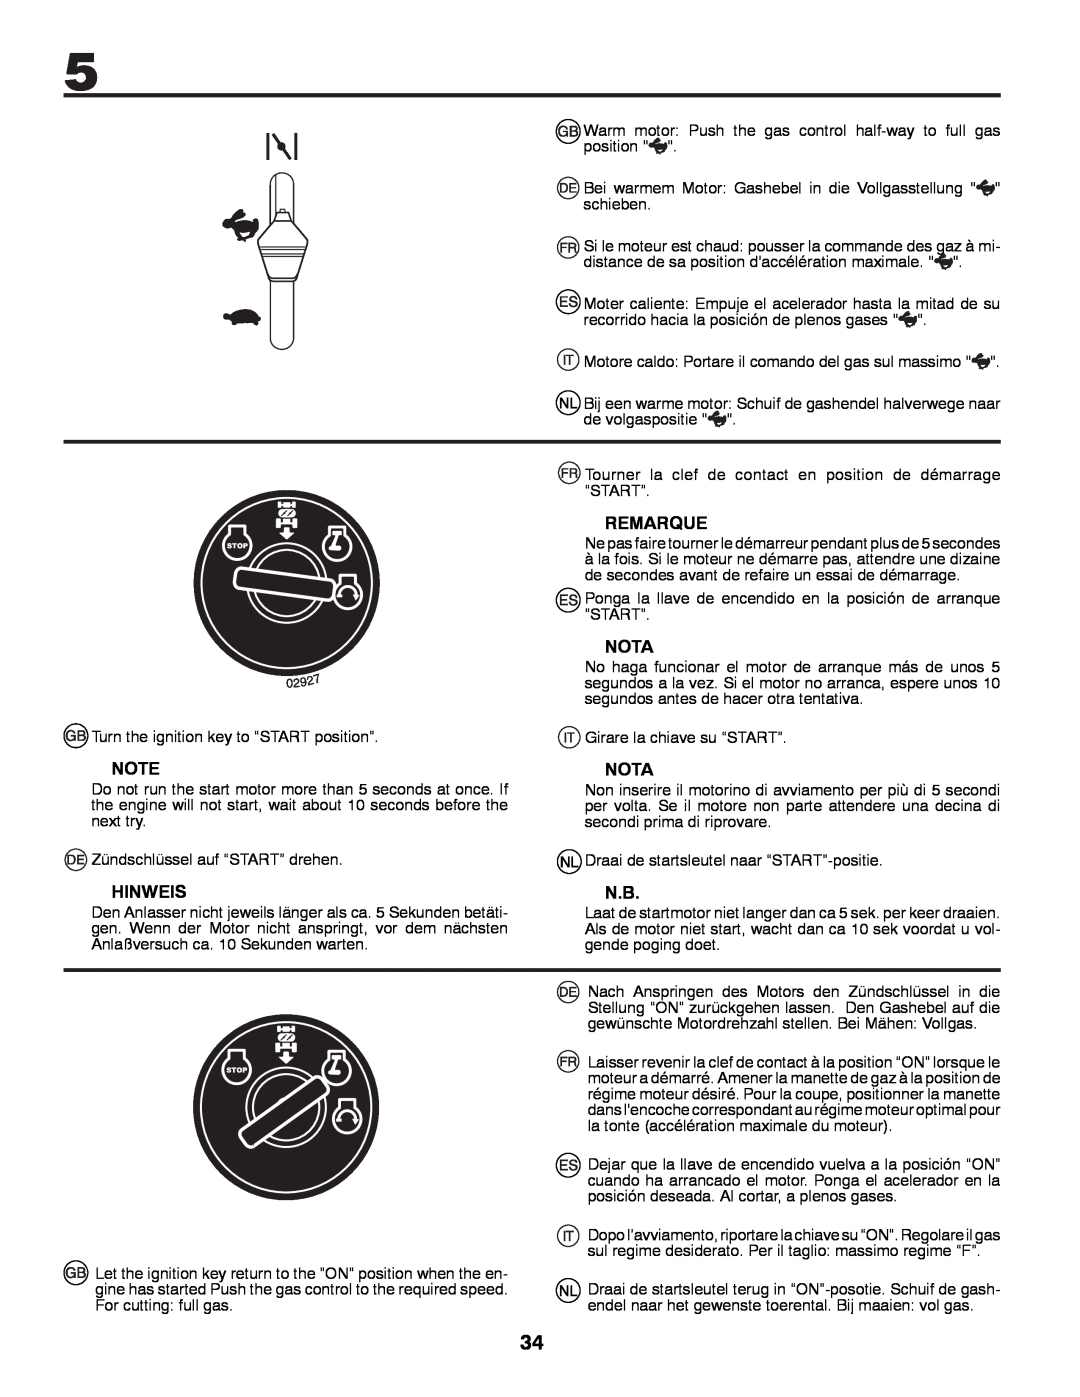 Partner Tech P11577 instruction manual Hinweis, Remarque, Nota, Turn the ignition key to “START position” 